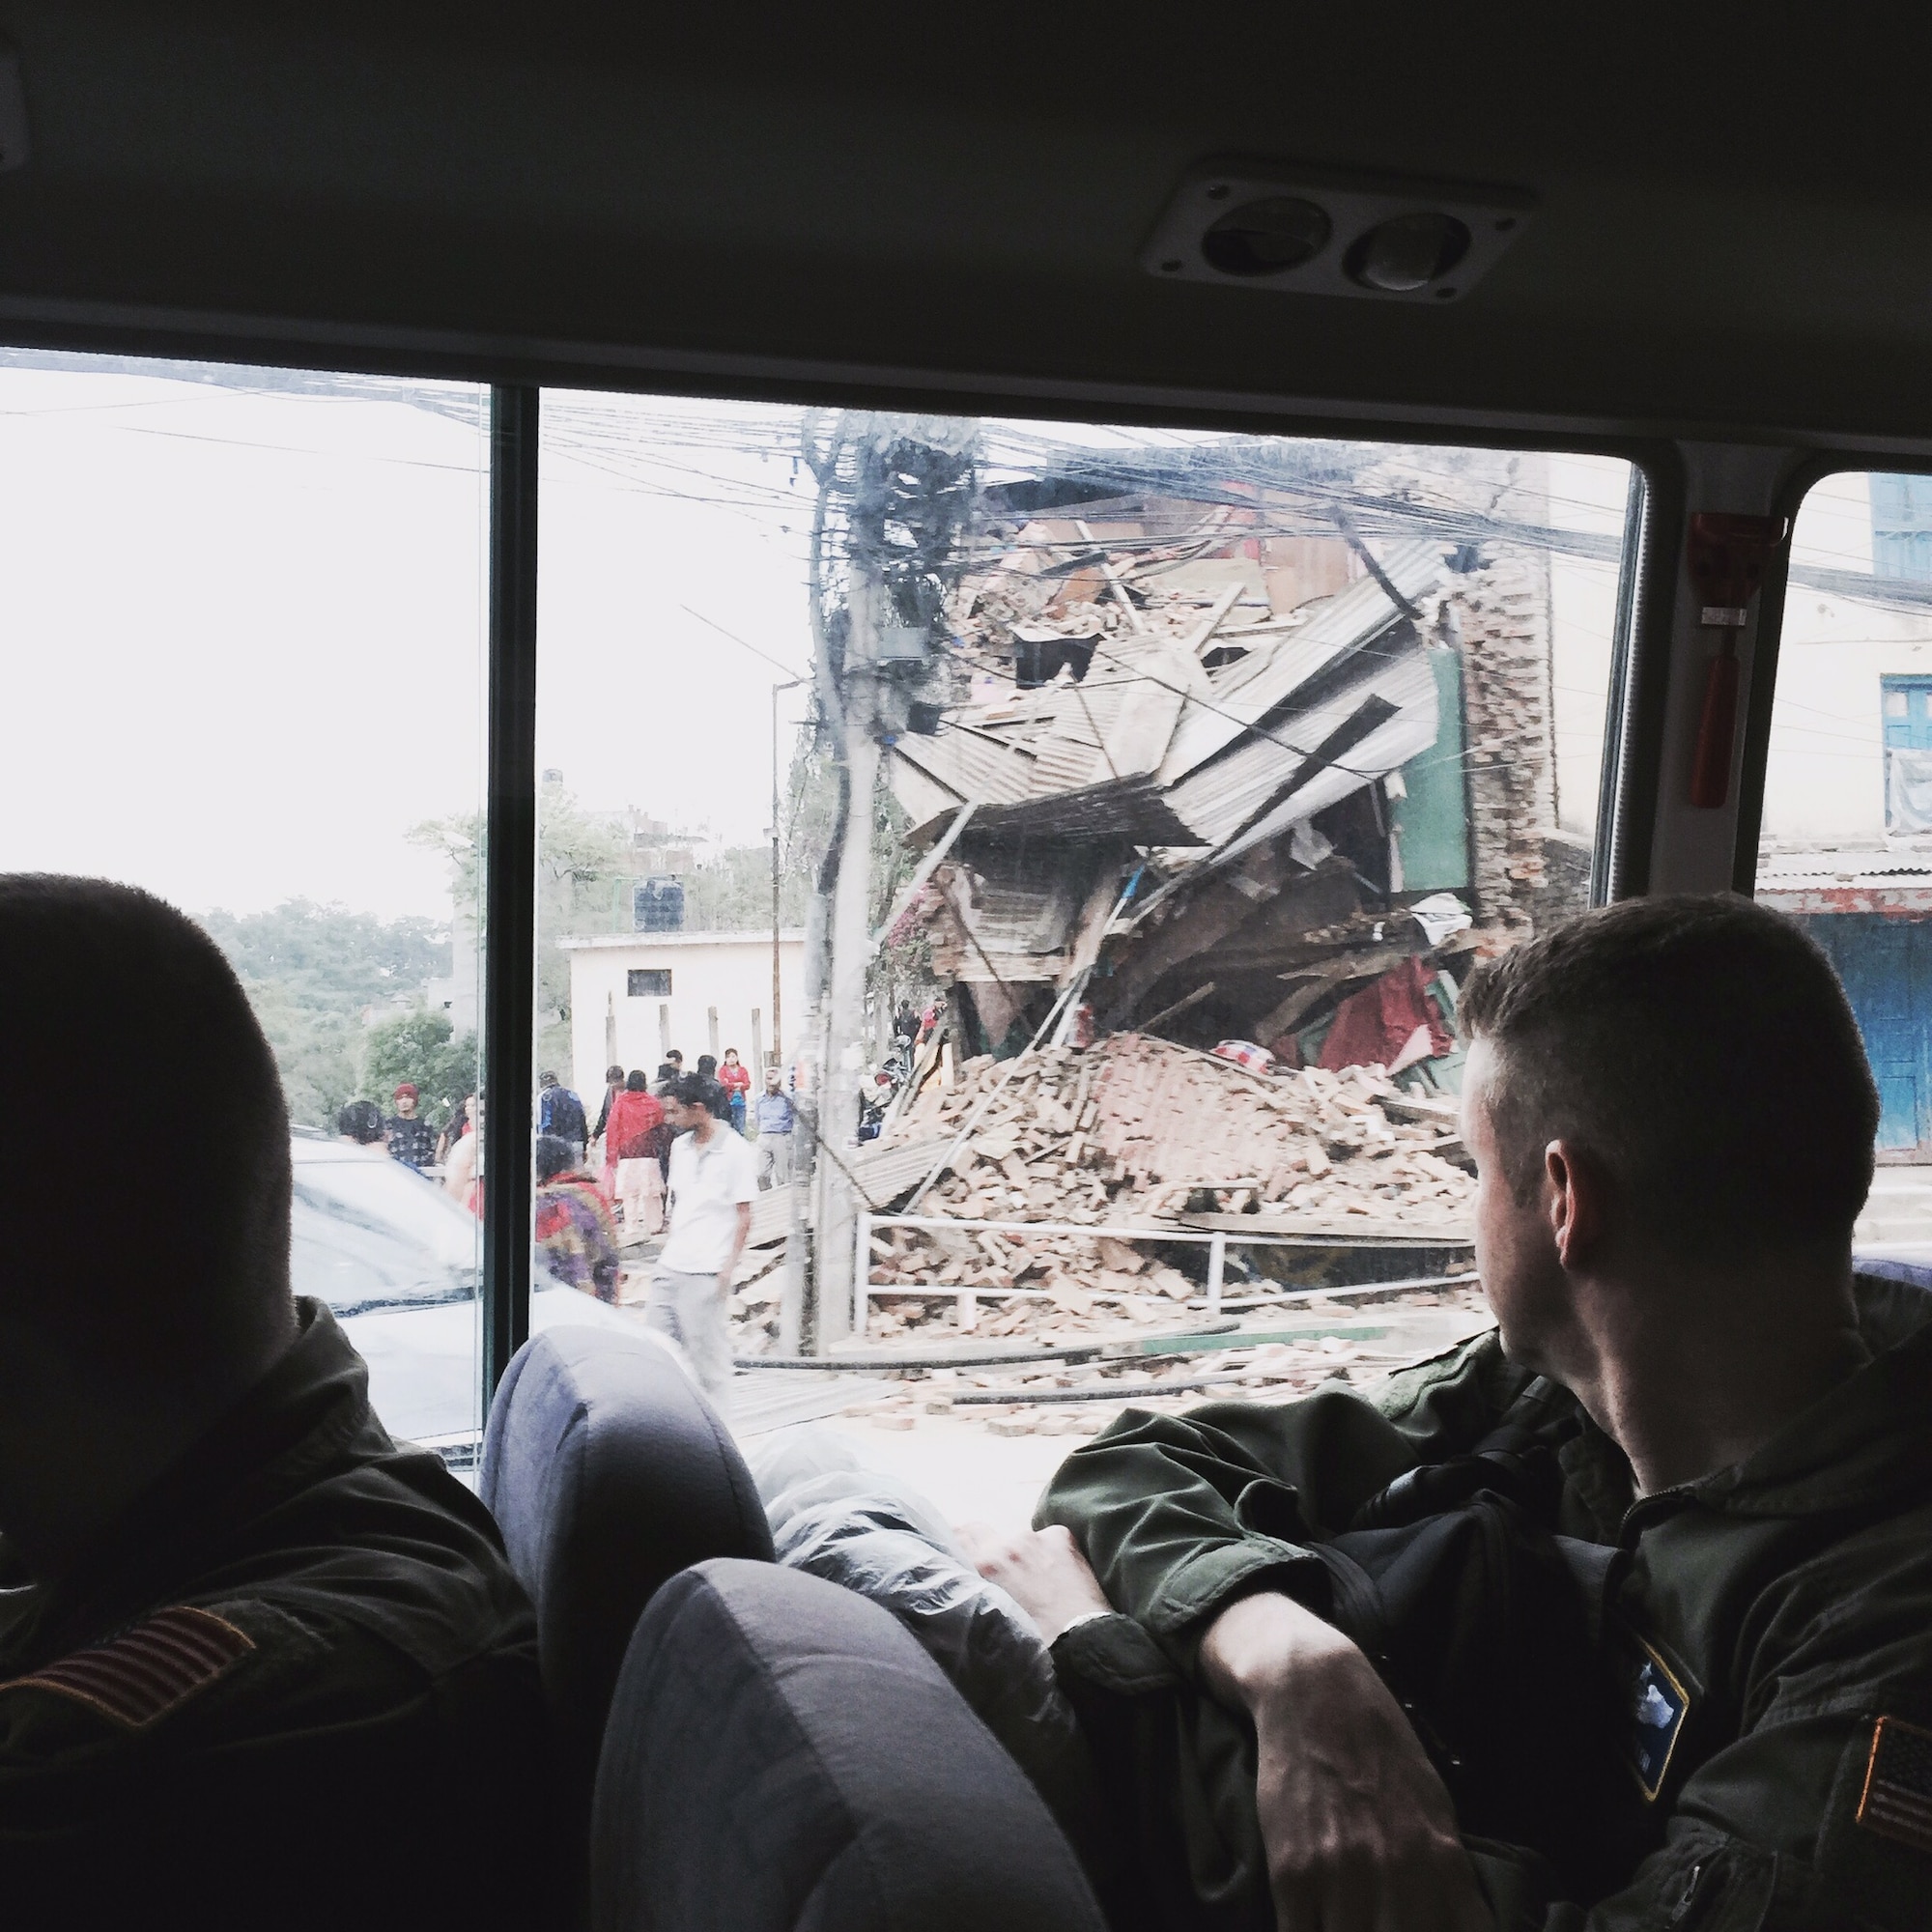 Members of the U.S. Air Force view the damage in Nepal first hand following 
the devastating 7.8 magnitude earthquake that damaged many parts of the 
country.  (Courtesy photo)
